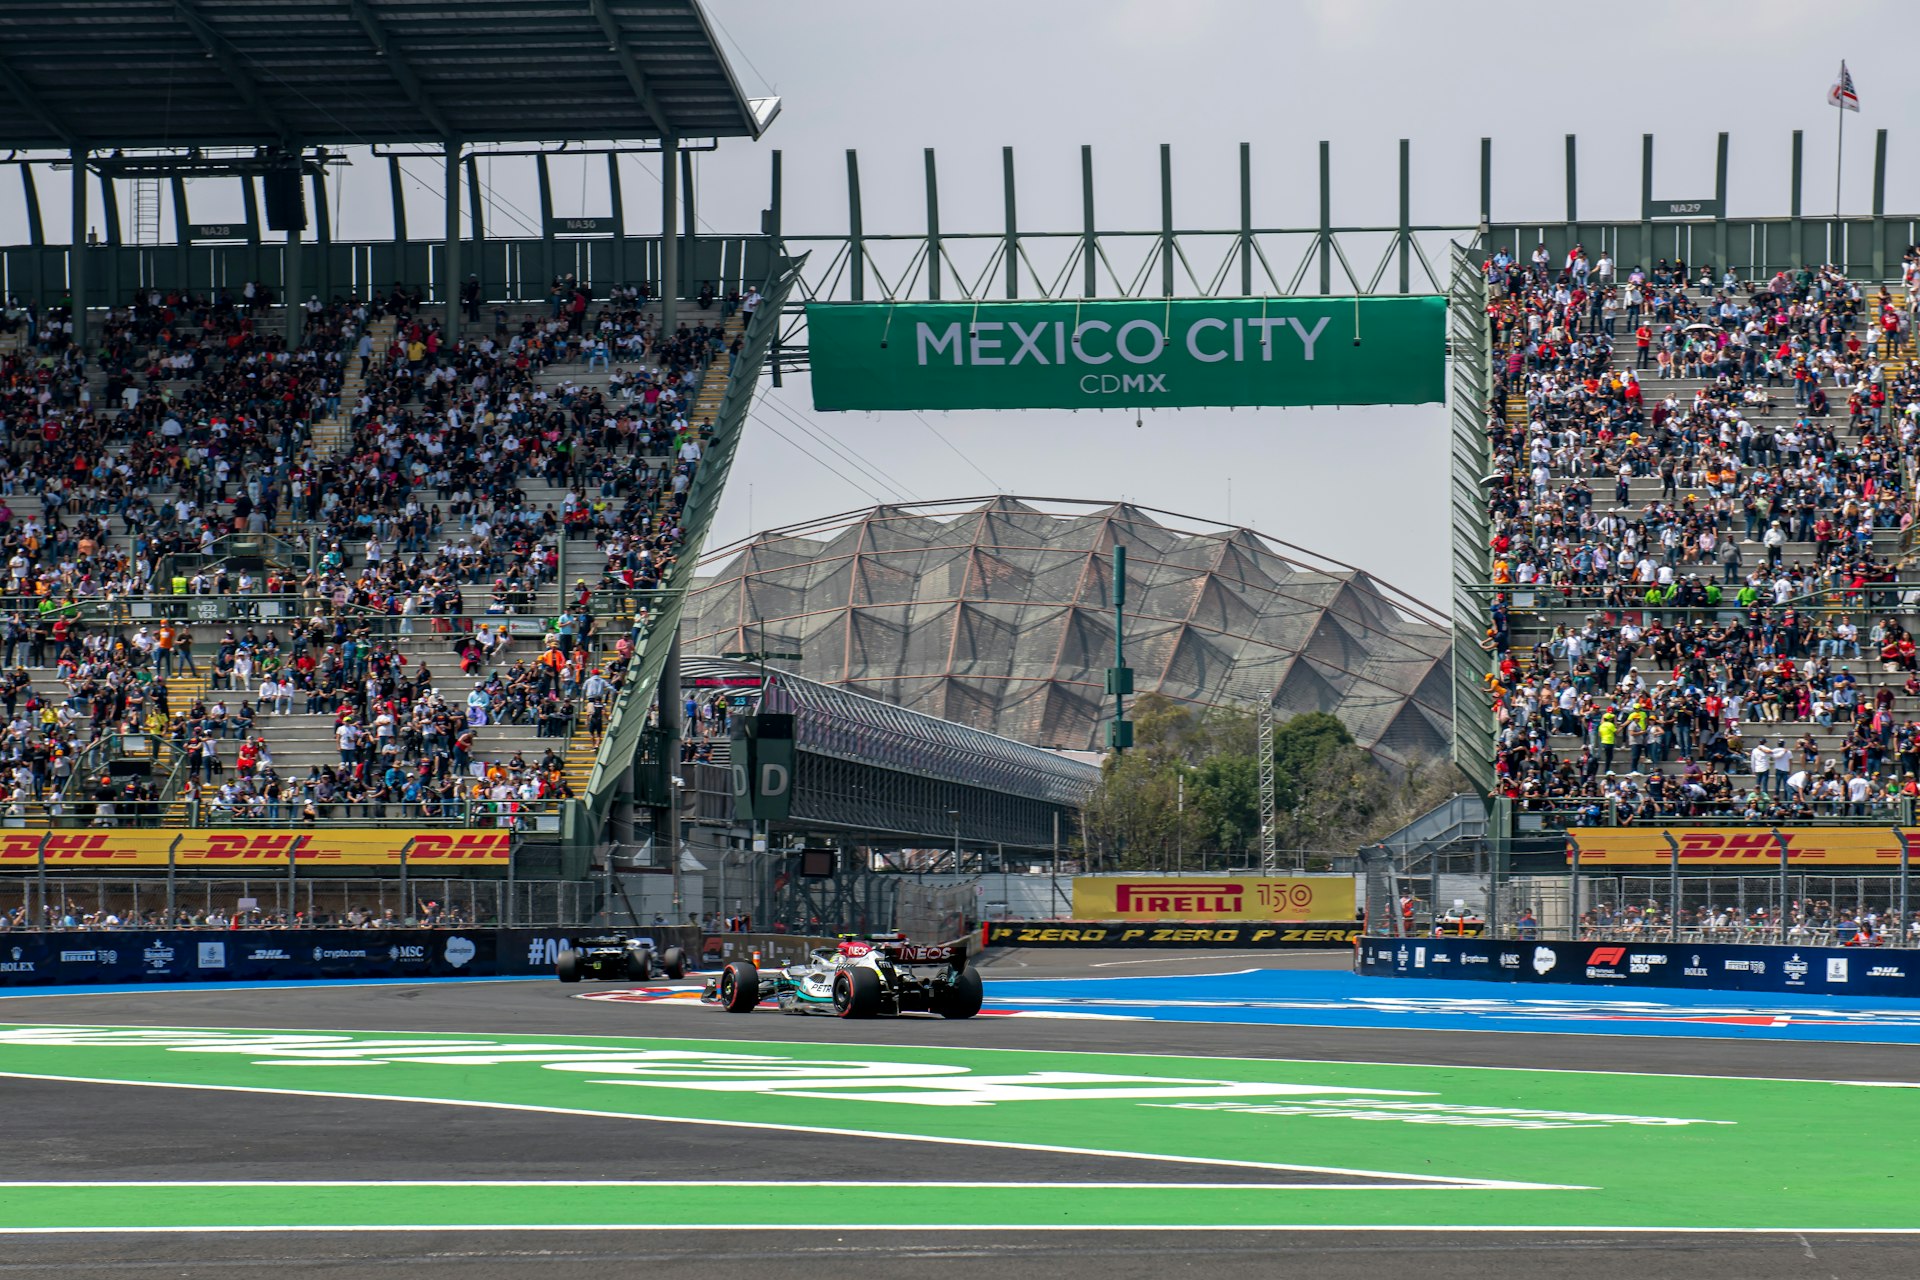 An F1 car on a track in front of huge crowds